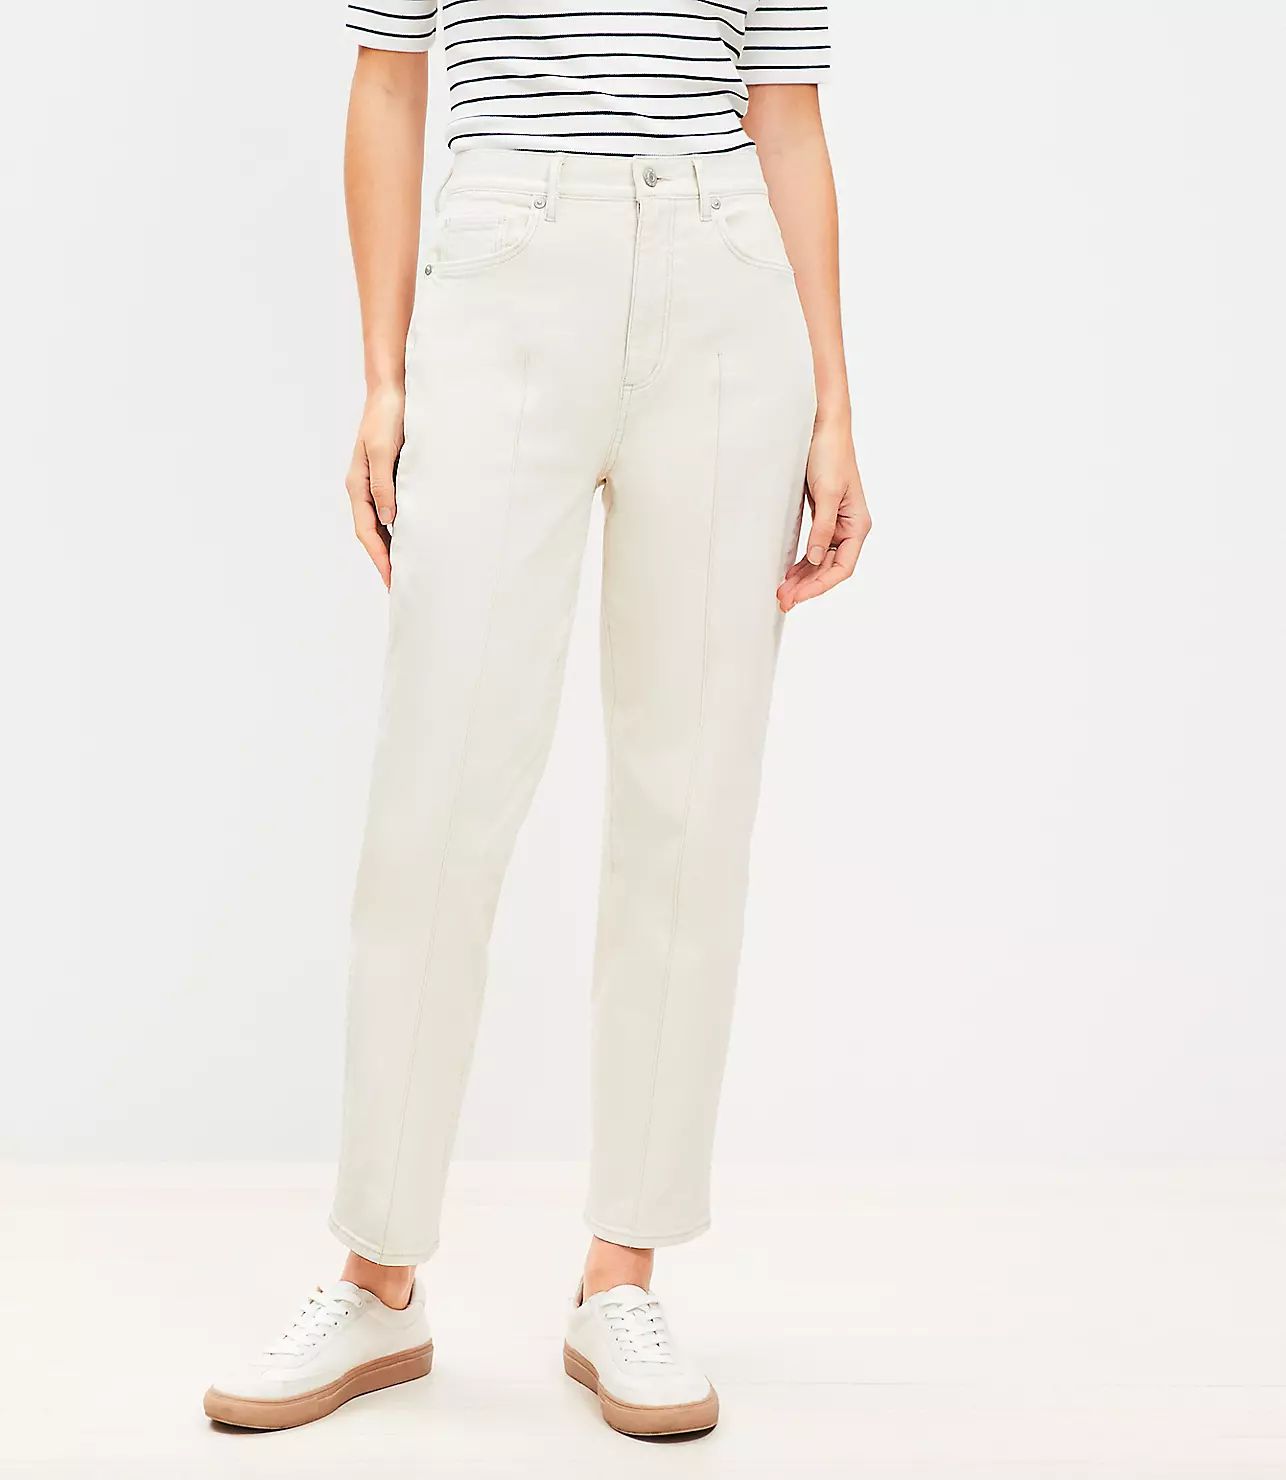 Petite Pintucked High Rise Straight Jeans in Popcorn | LOFT